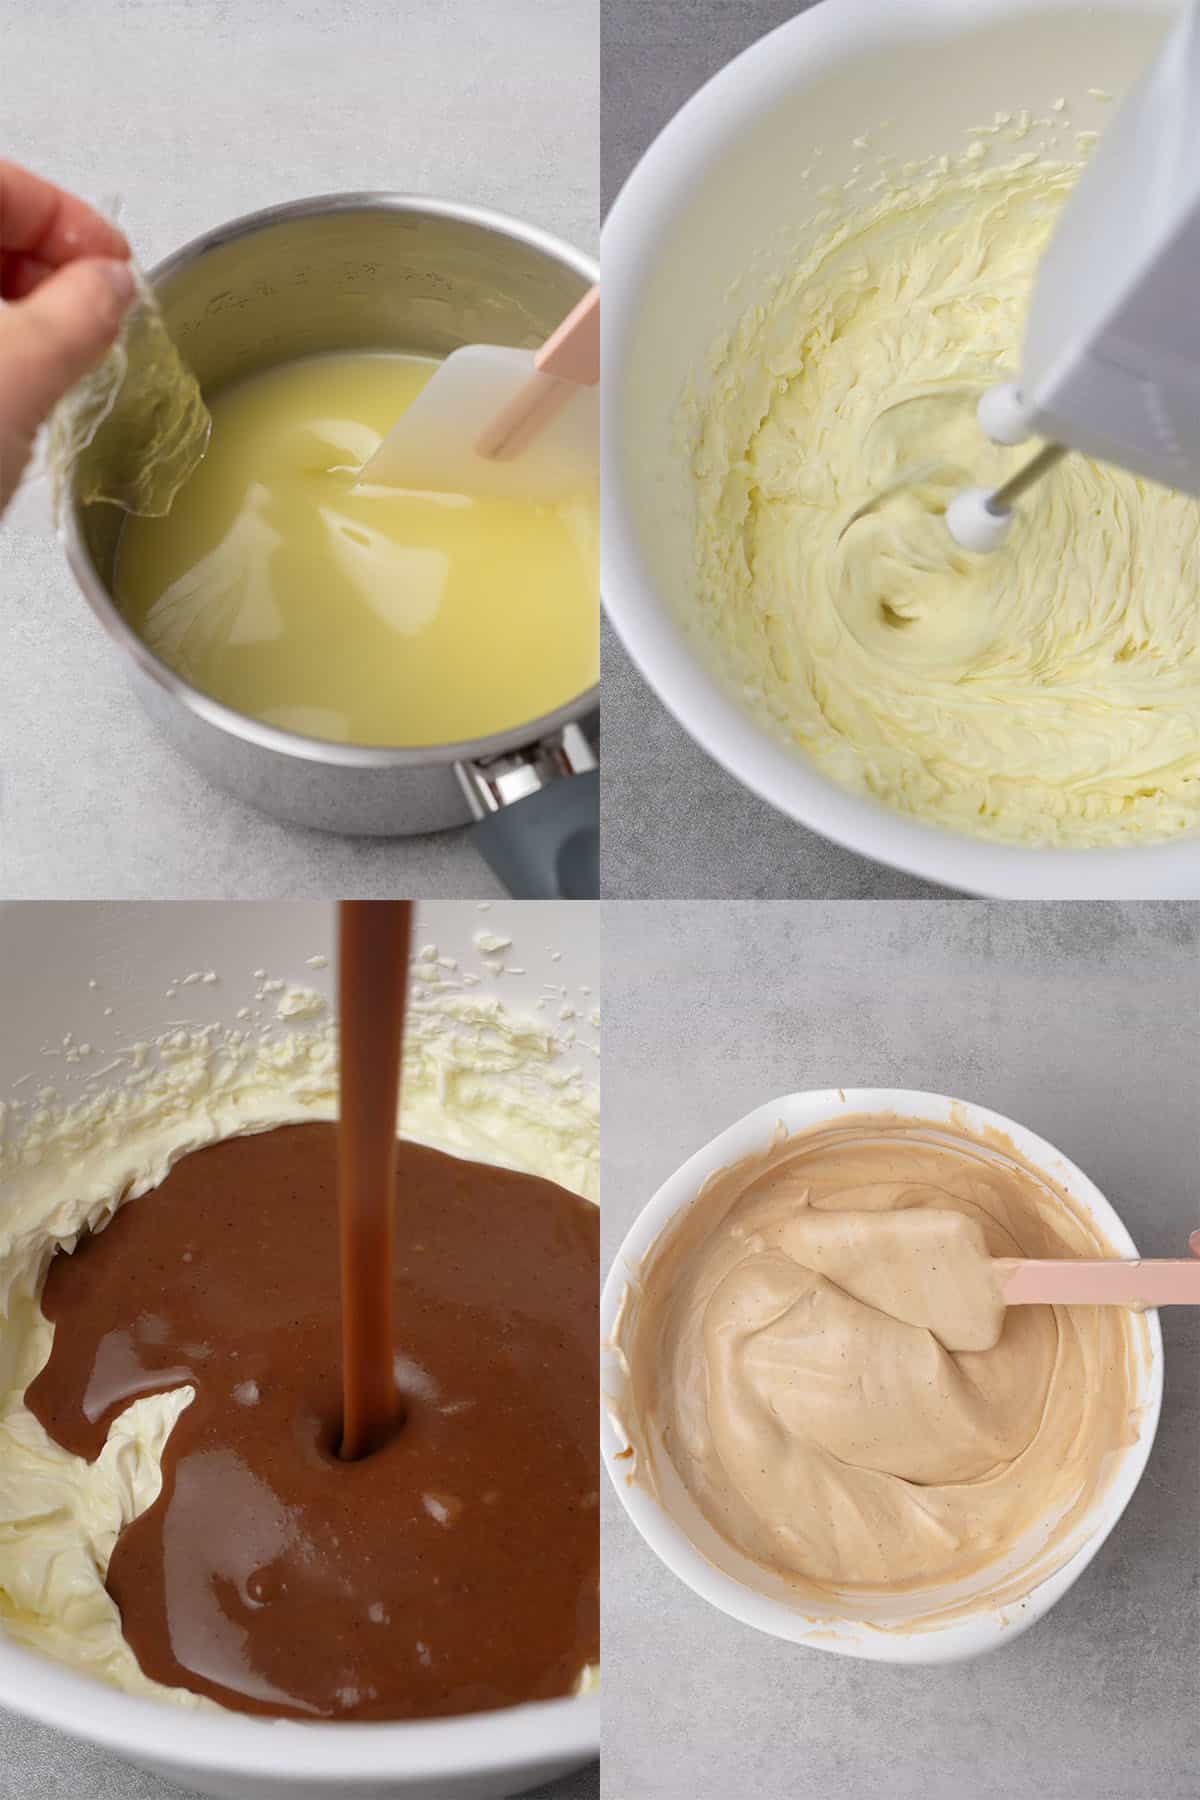 Step-by-step assembly of the biscoff cheesecake.